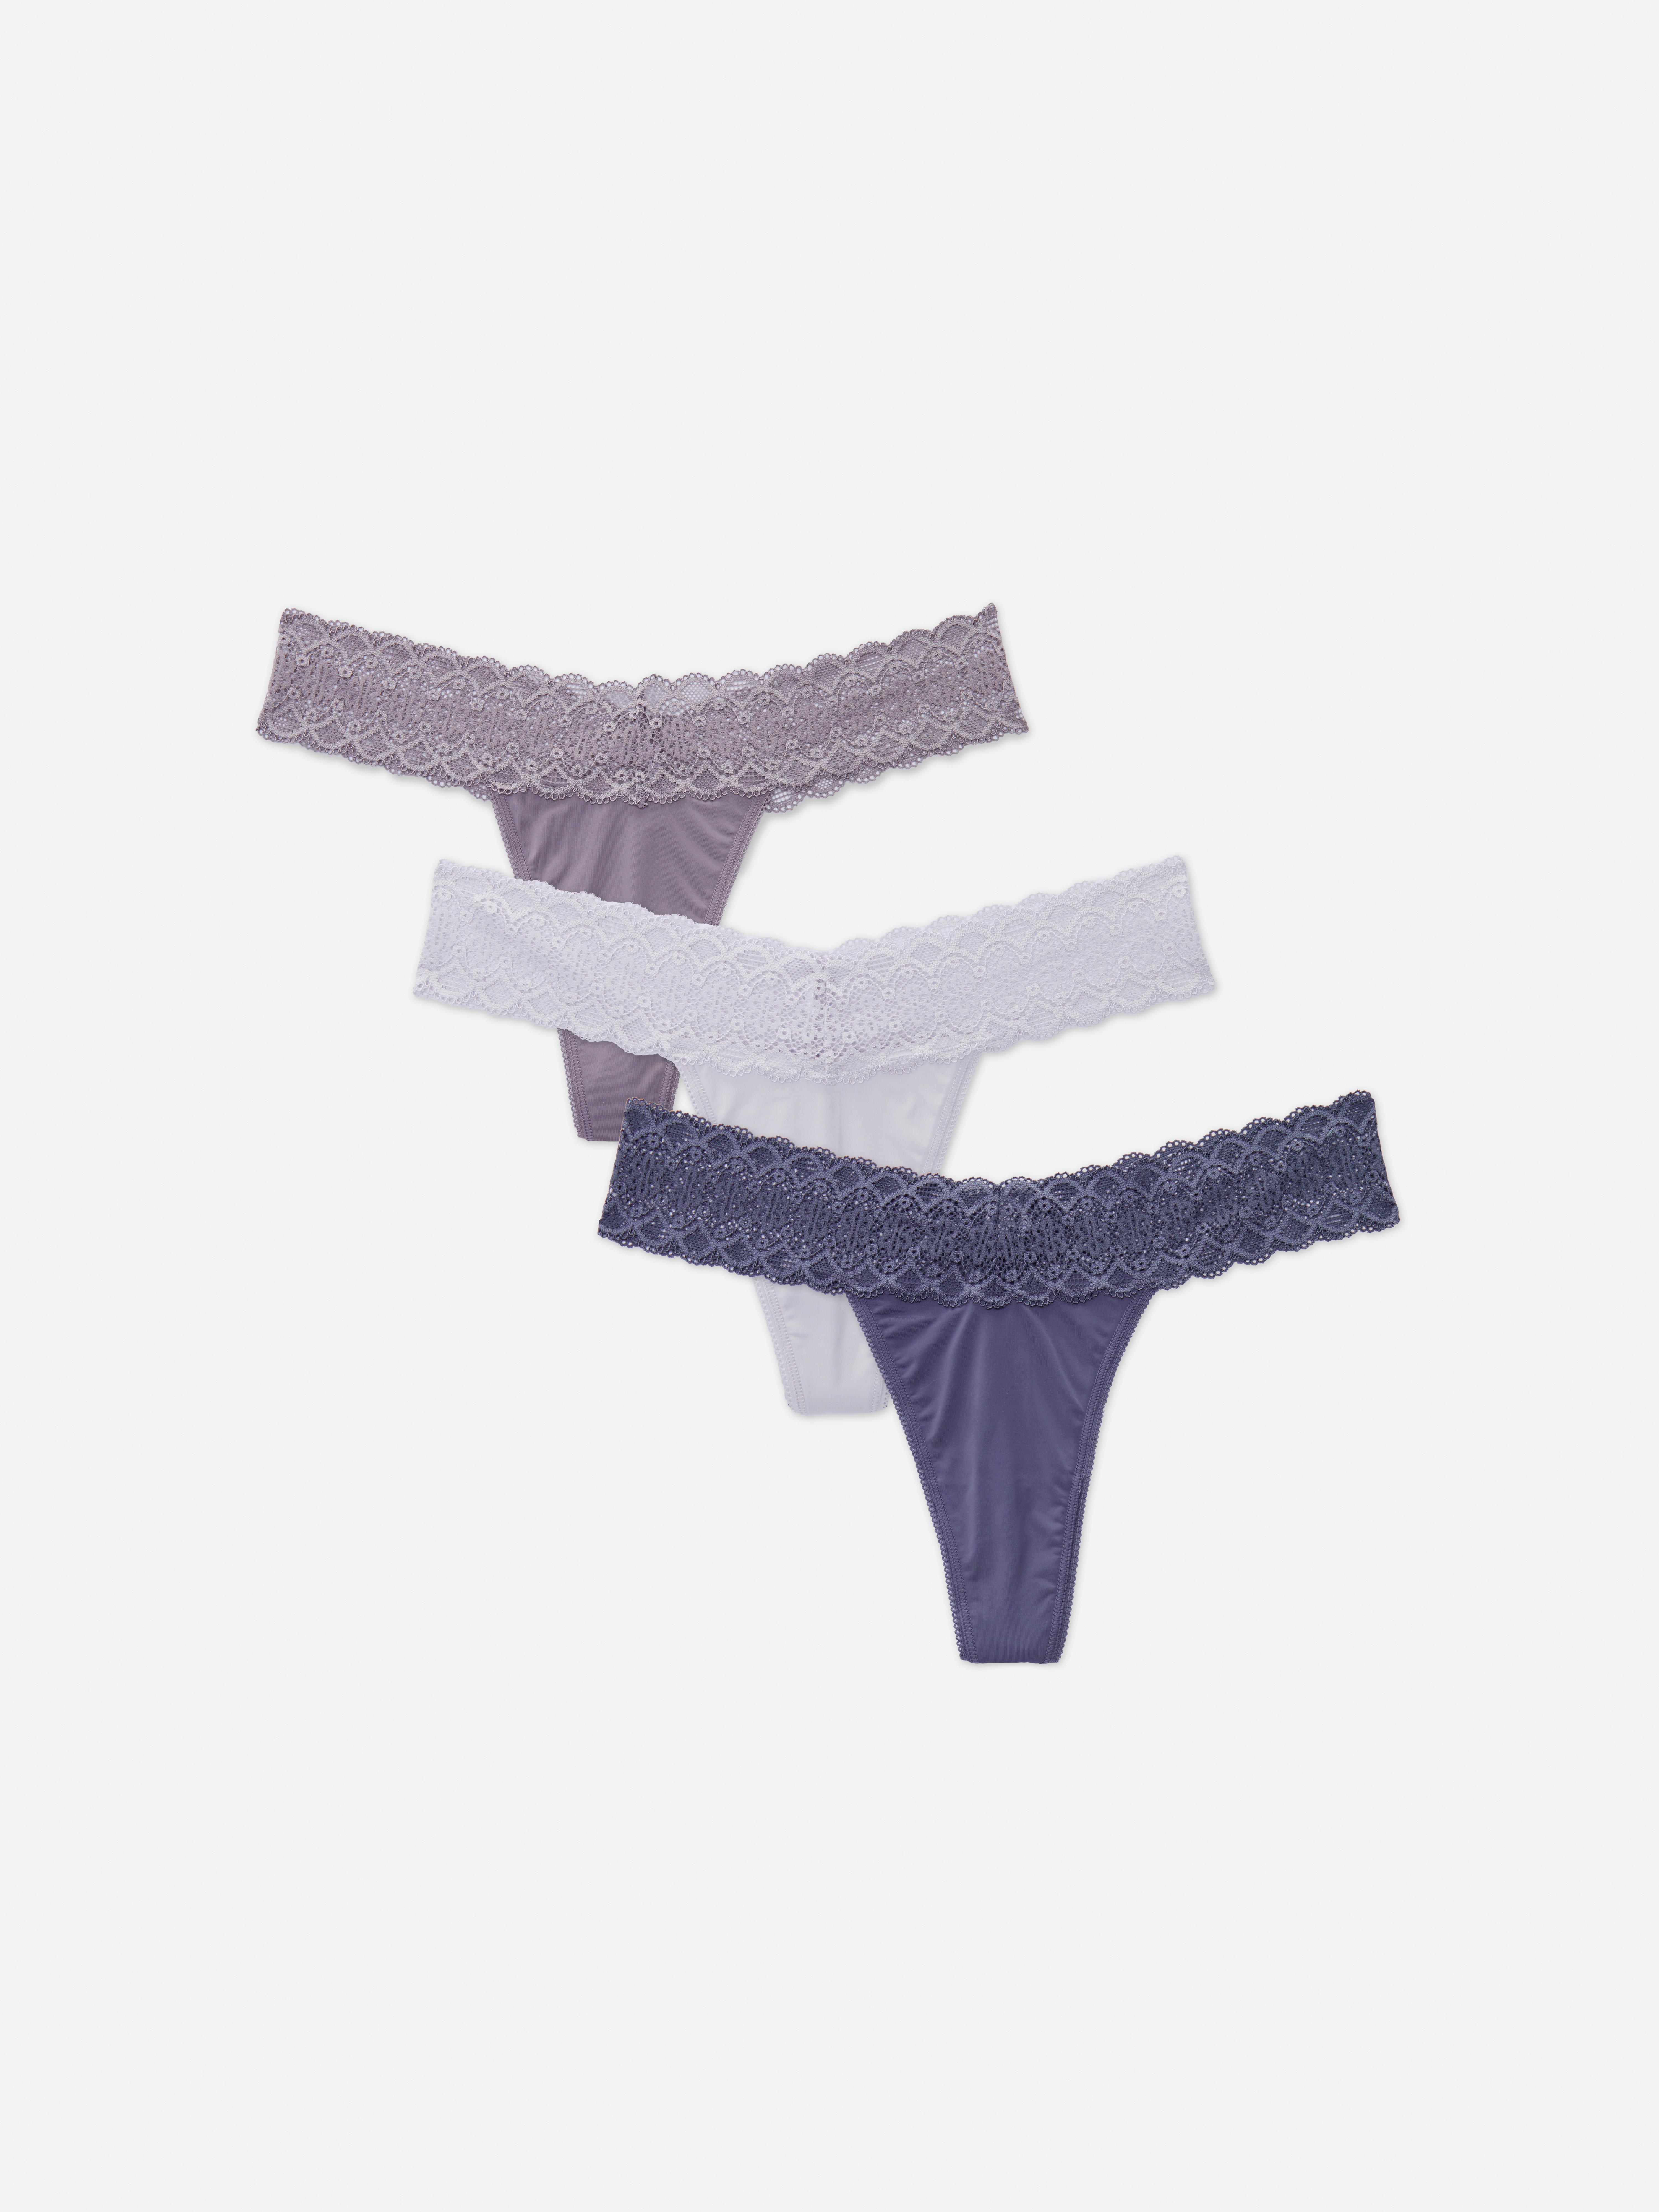 Buy Pastel Colours Thong Cotton and Lace Knickers 4 Pack from Next Poland